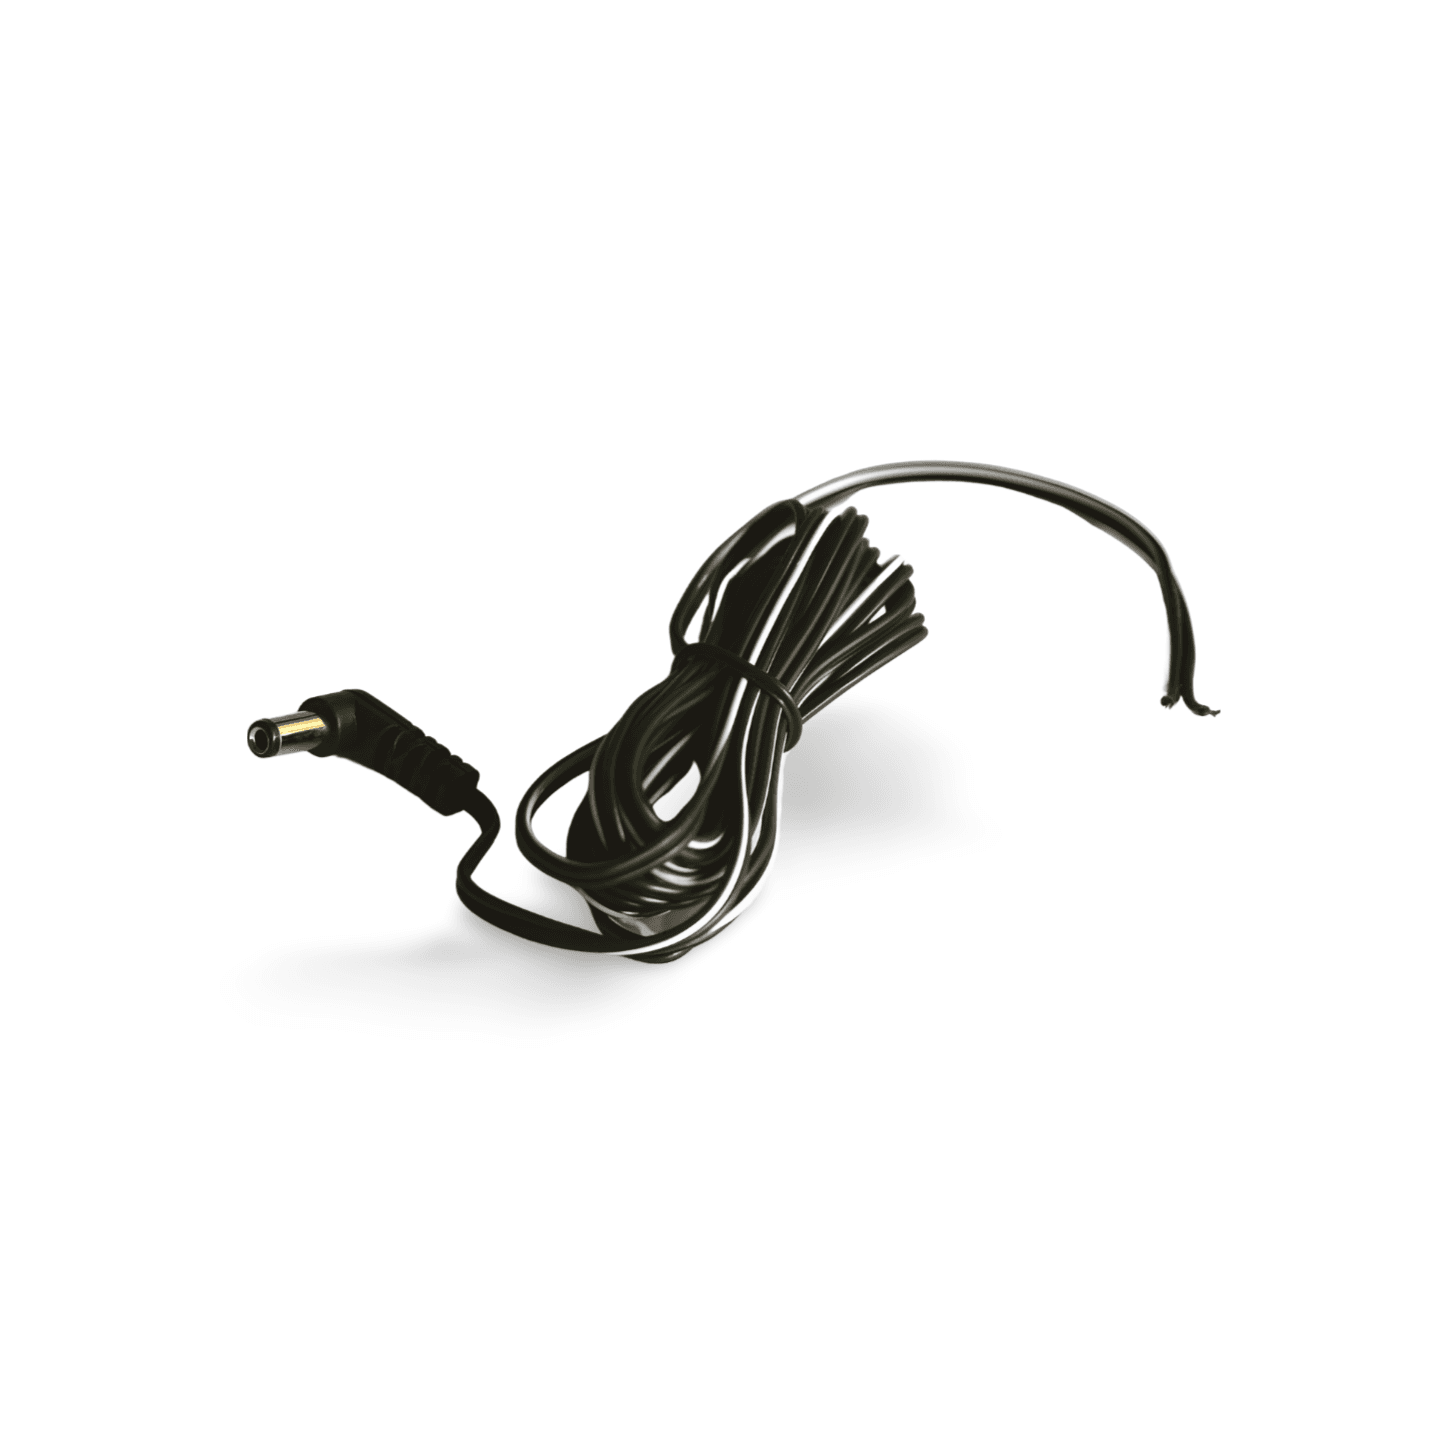 6ft DC Power Cable 2.5mm x 5.5mm black